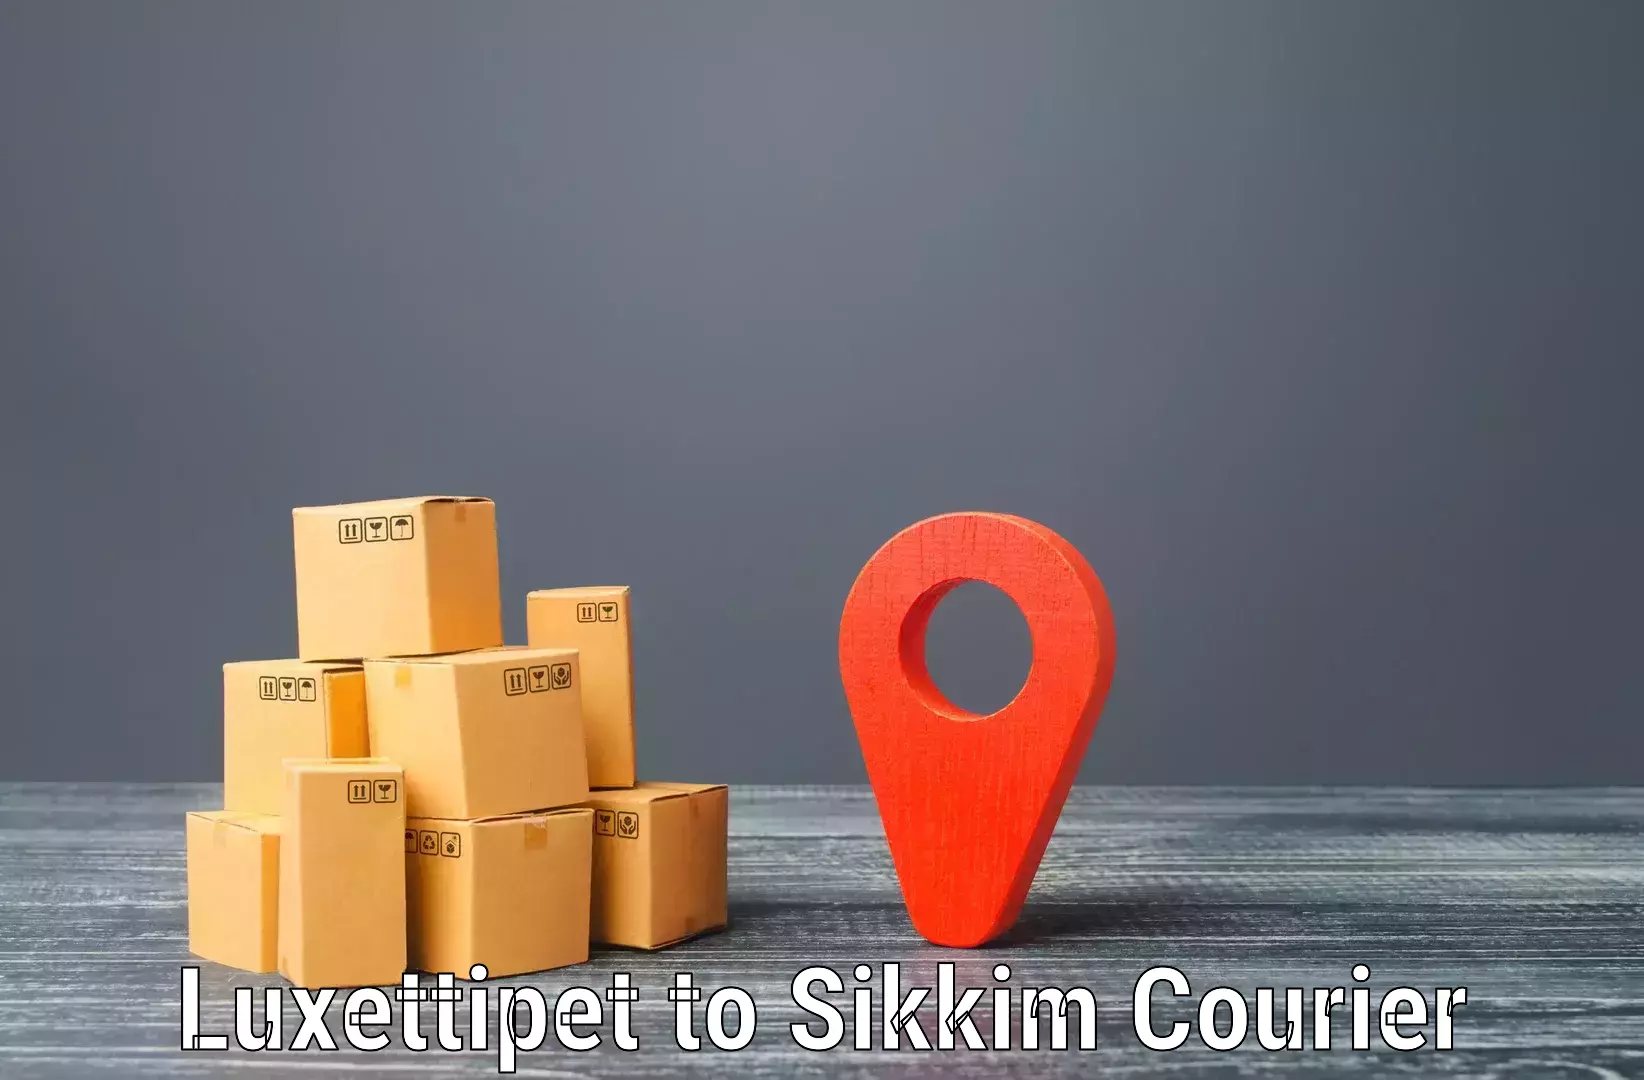 Efficient shipping platforms Luxettipet to East Sikkim